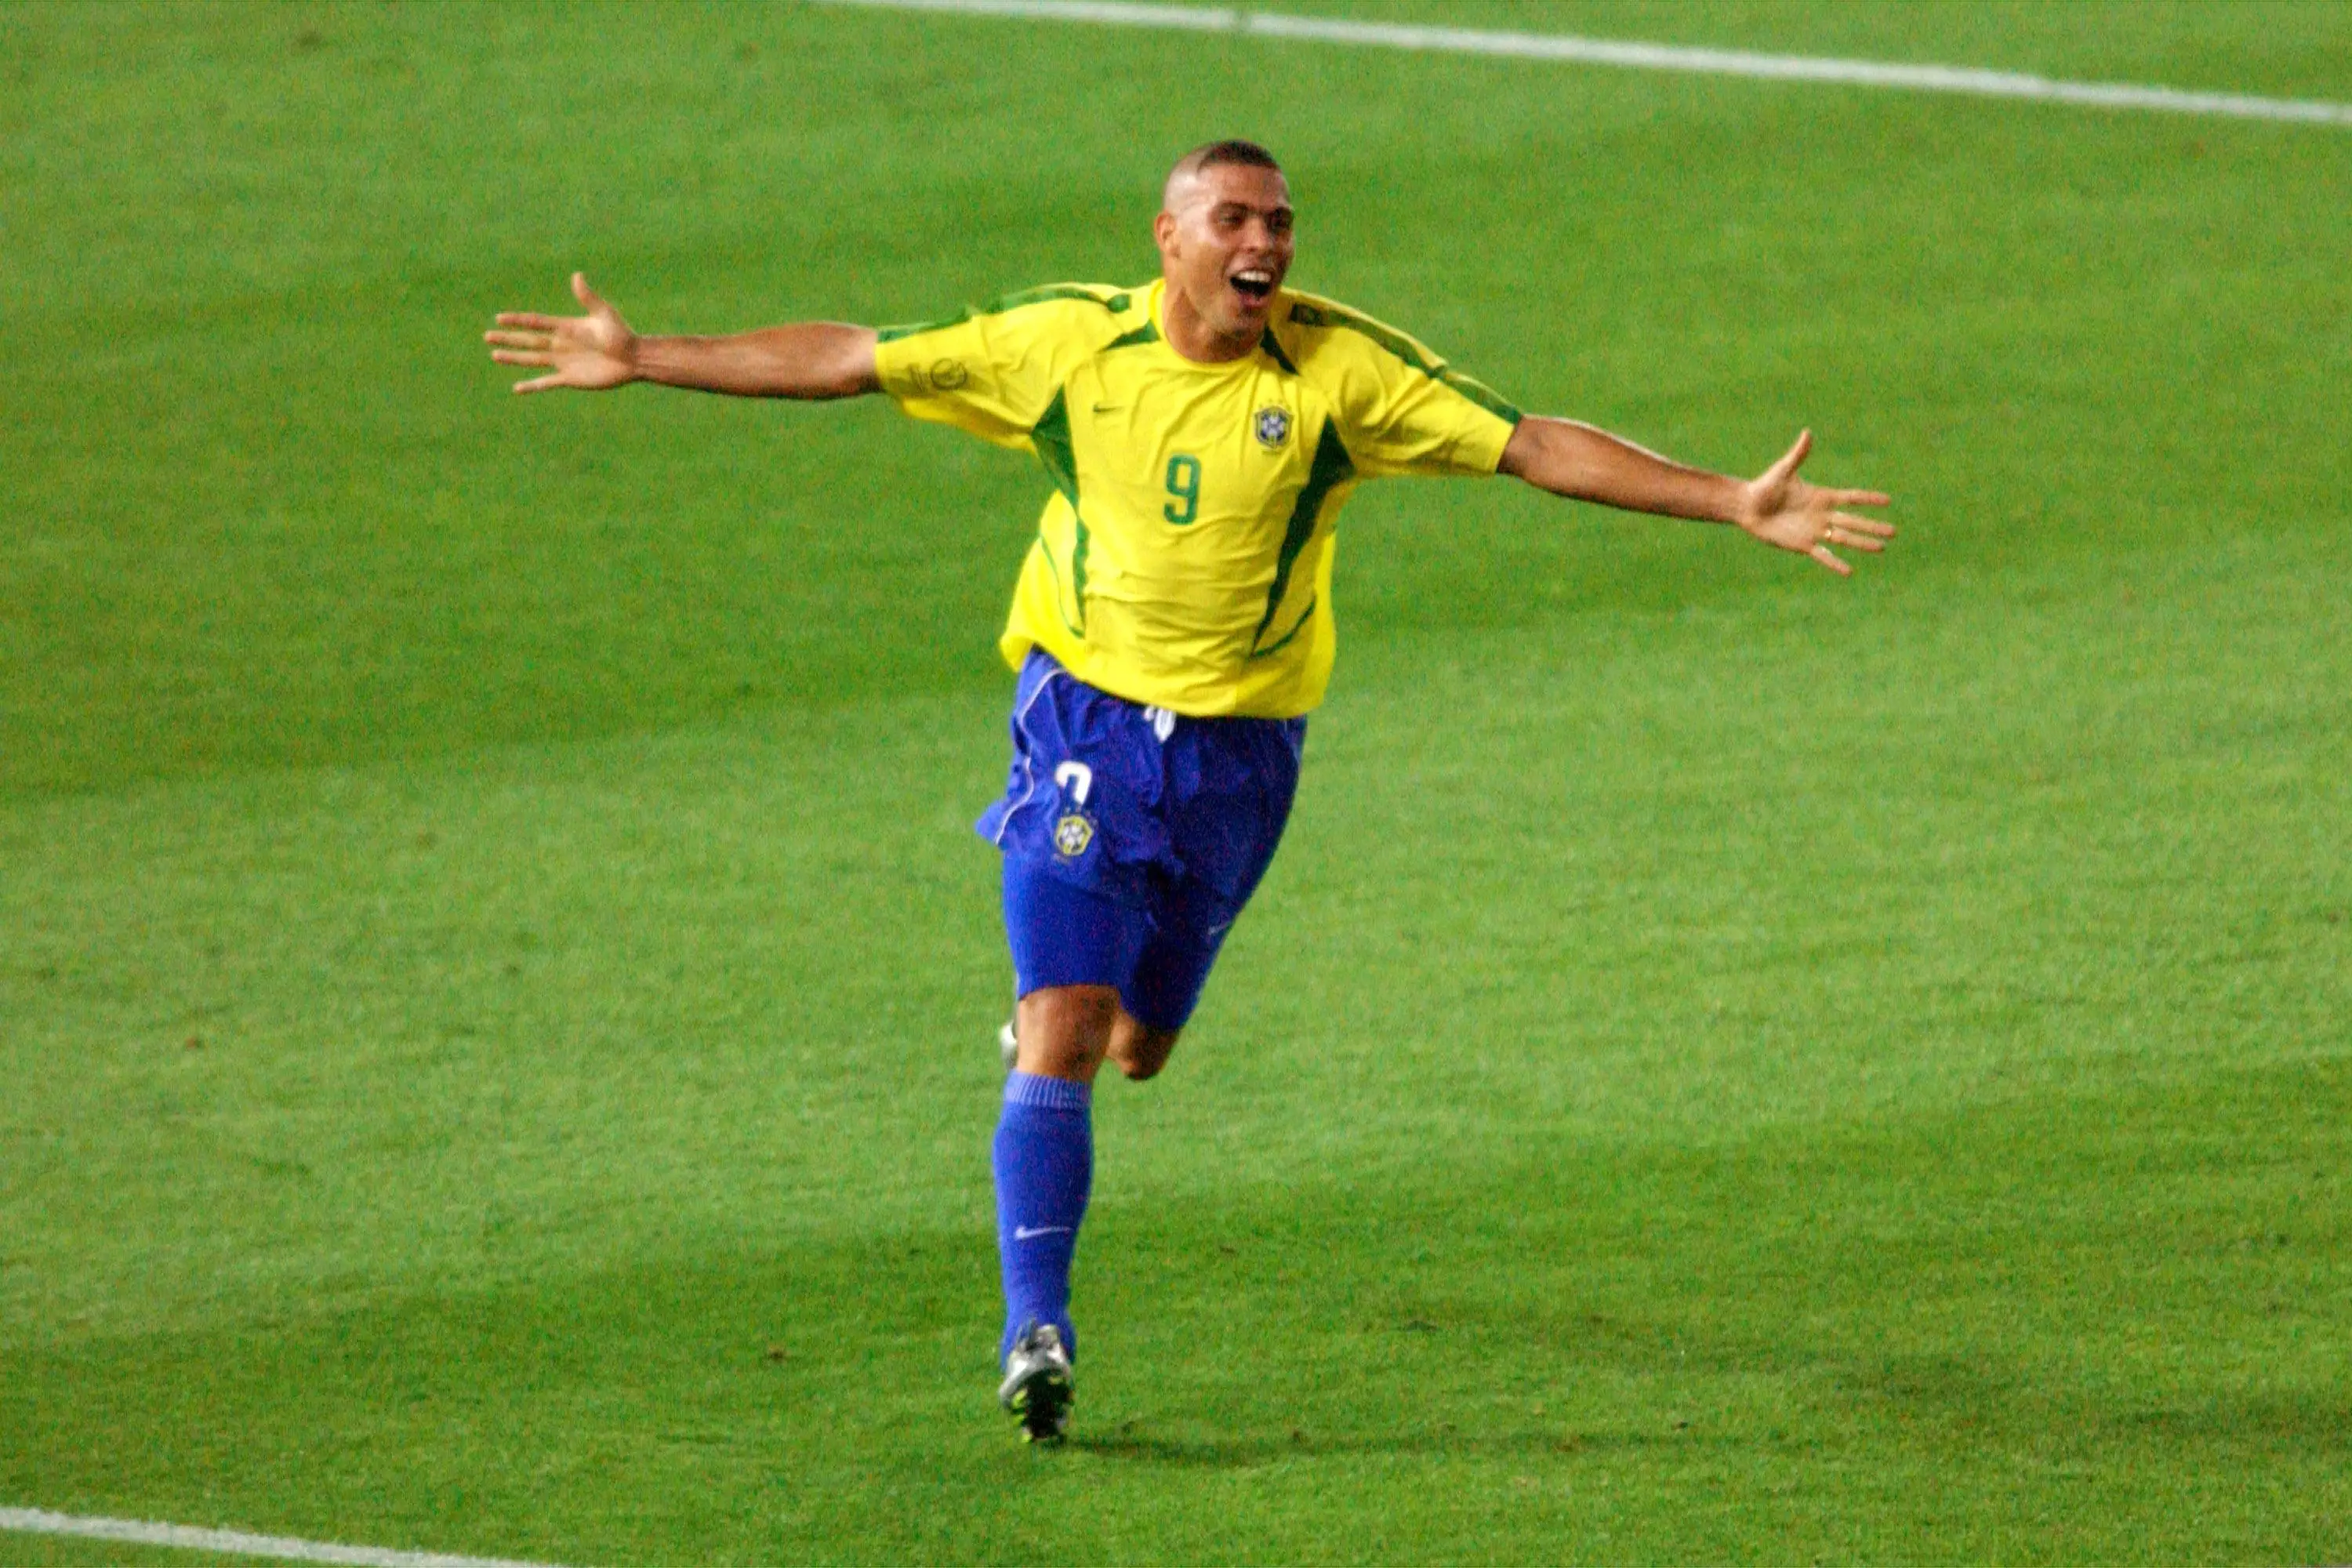 Ronaldo celebrates his goal in the final. Image: PA Images.